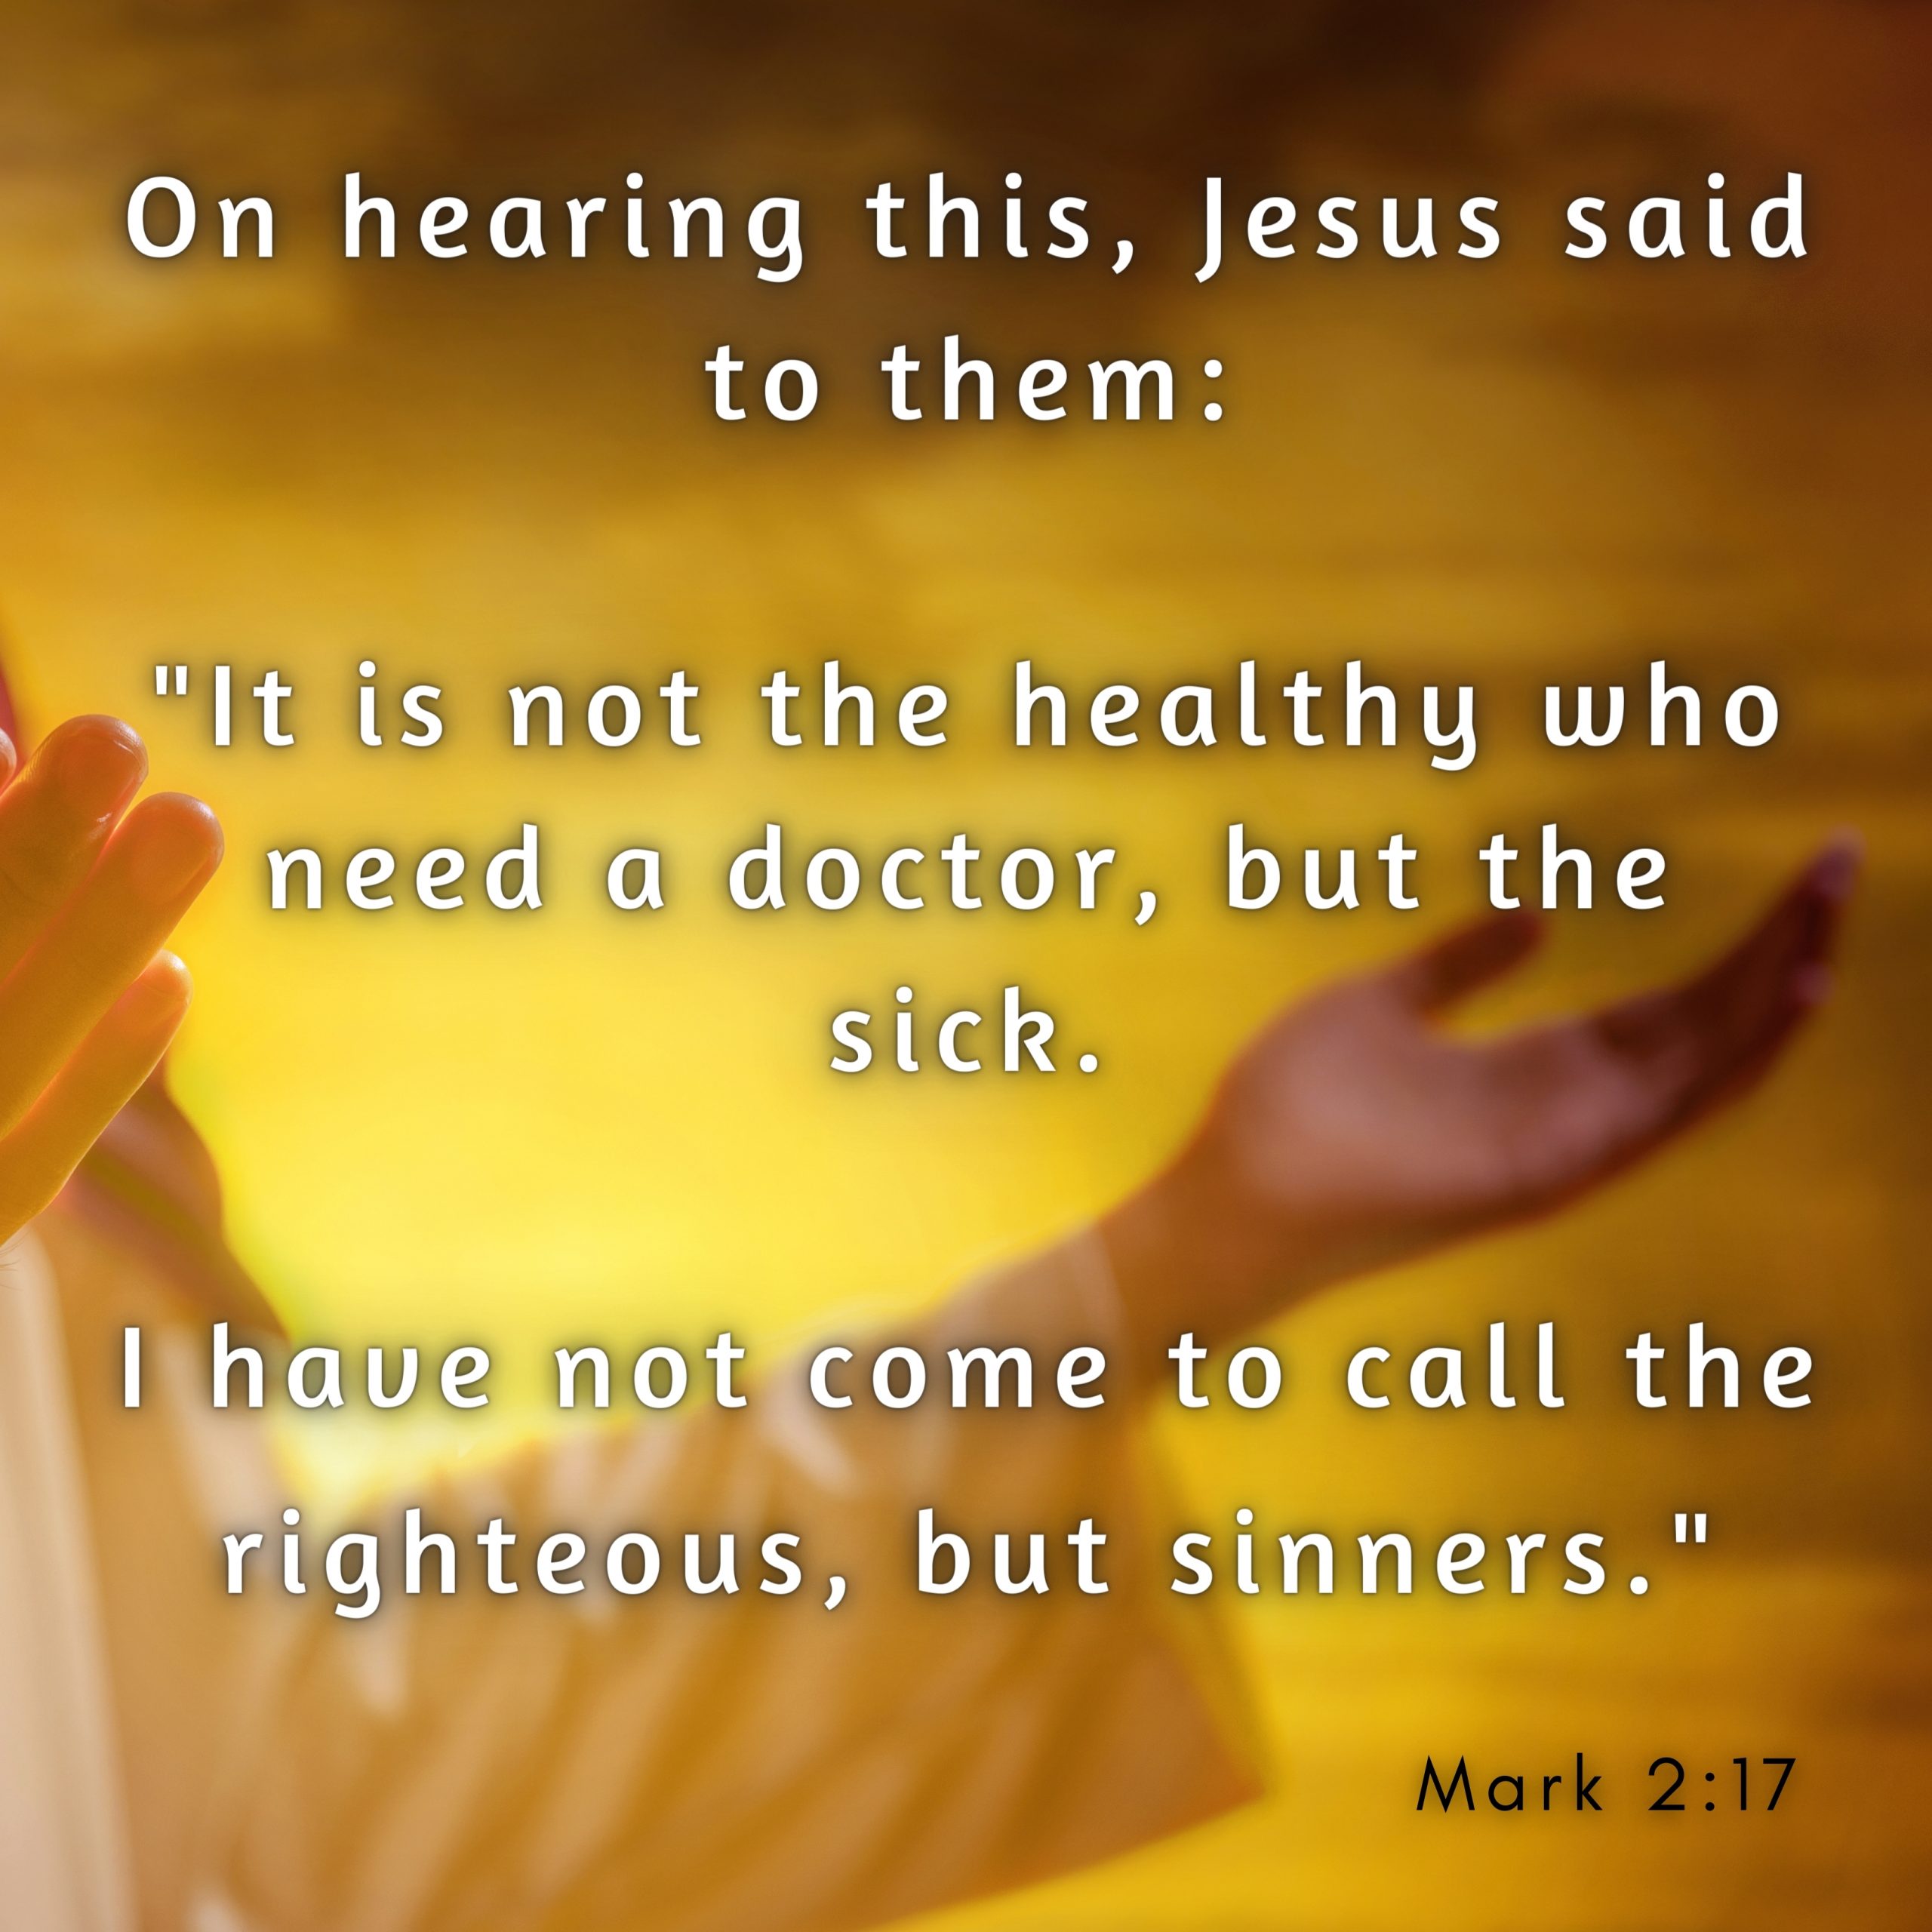 Jesus, the Physician of Souls